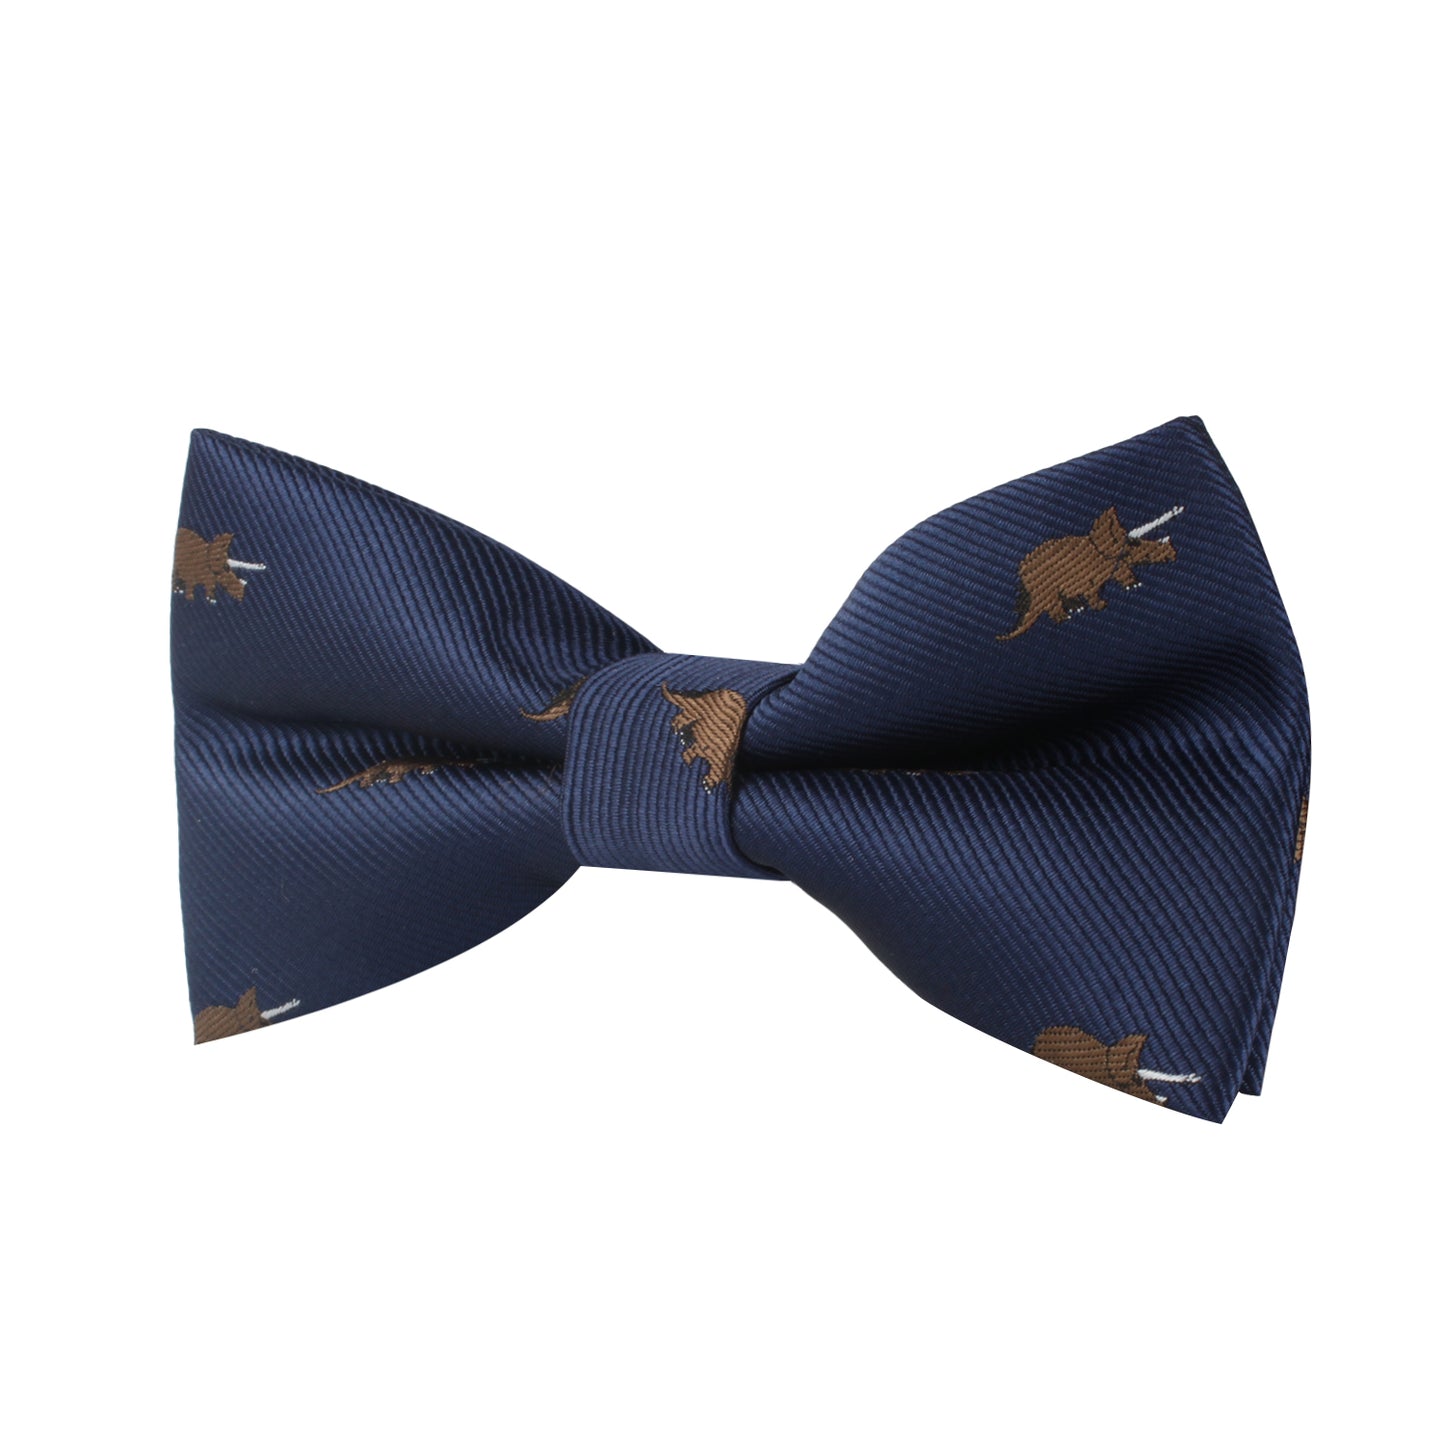 A fashionable cat bow tie.